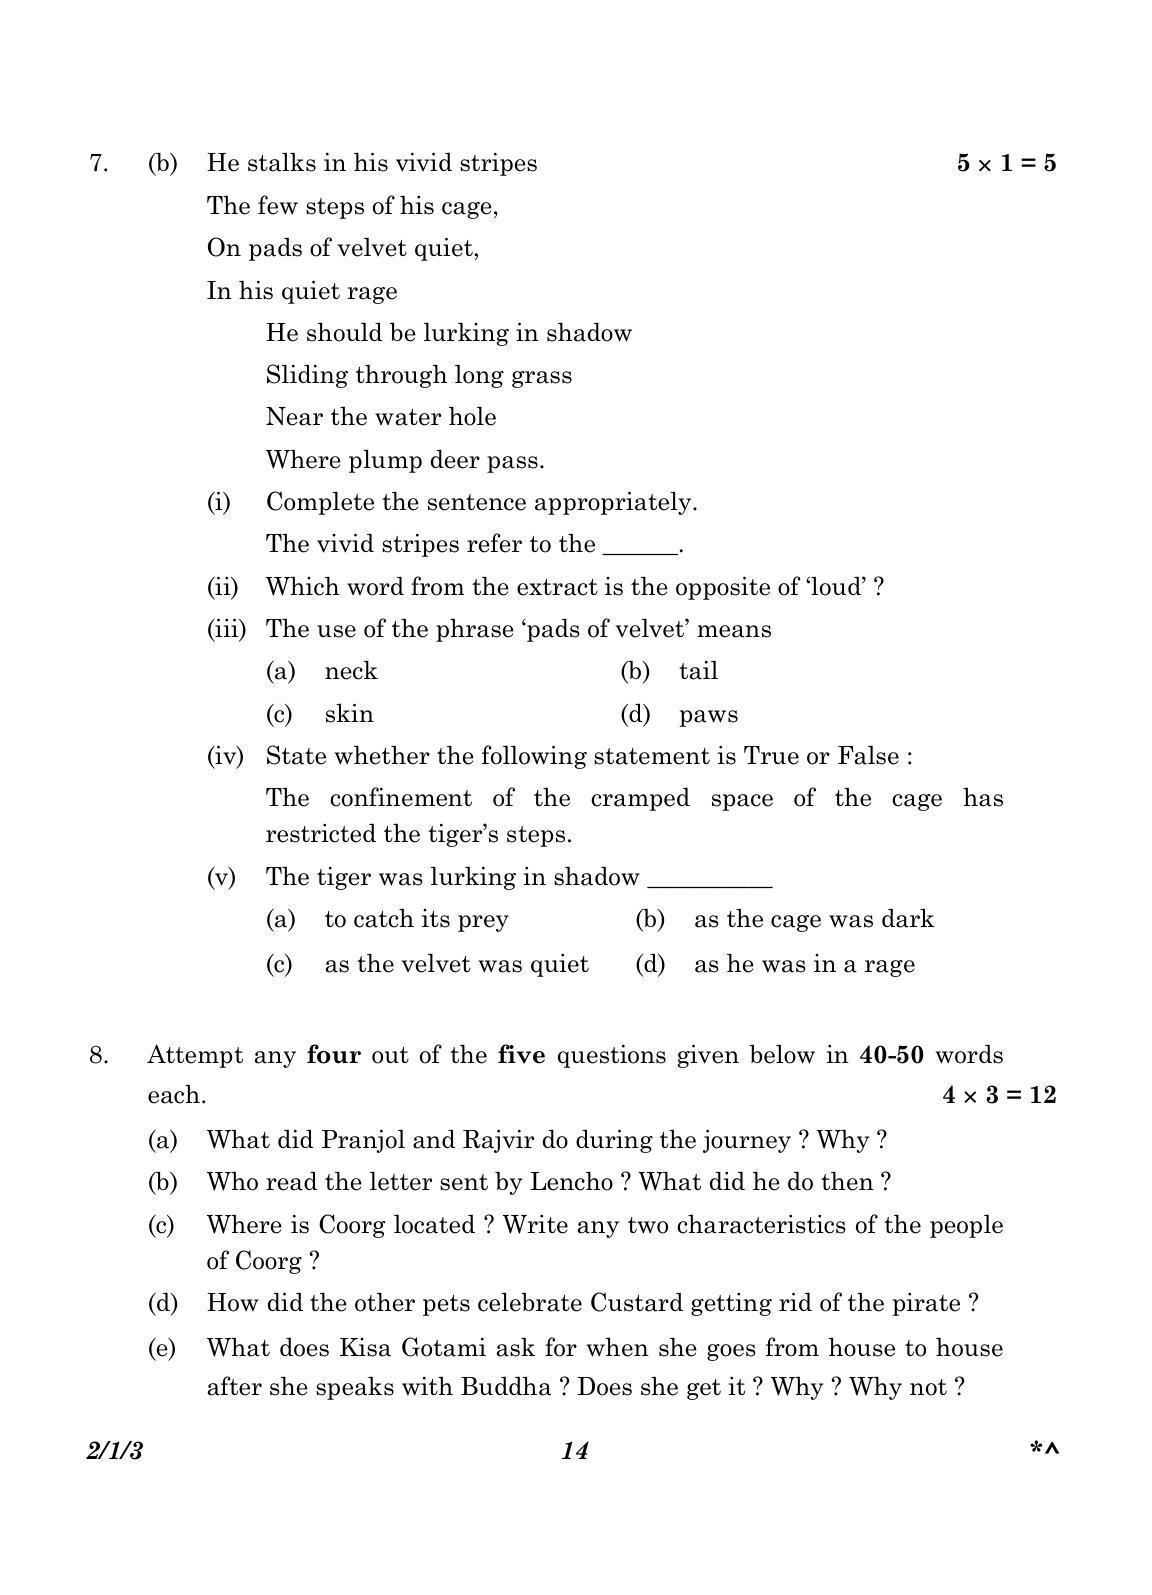 CBSE Class 10 2-1-3_English Language And Literature 2023 Question Paper - Page 14